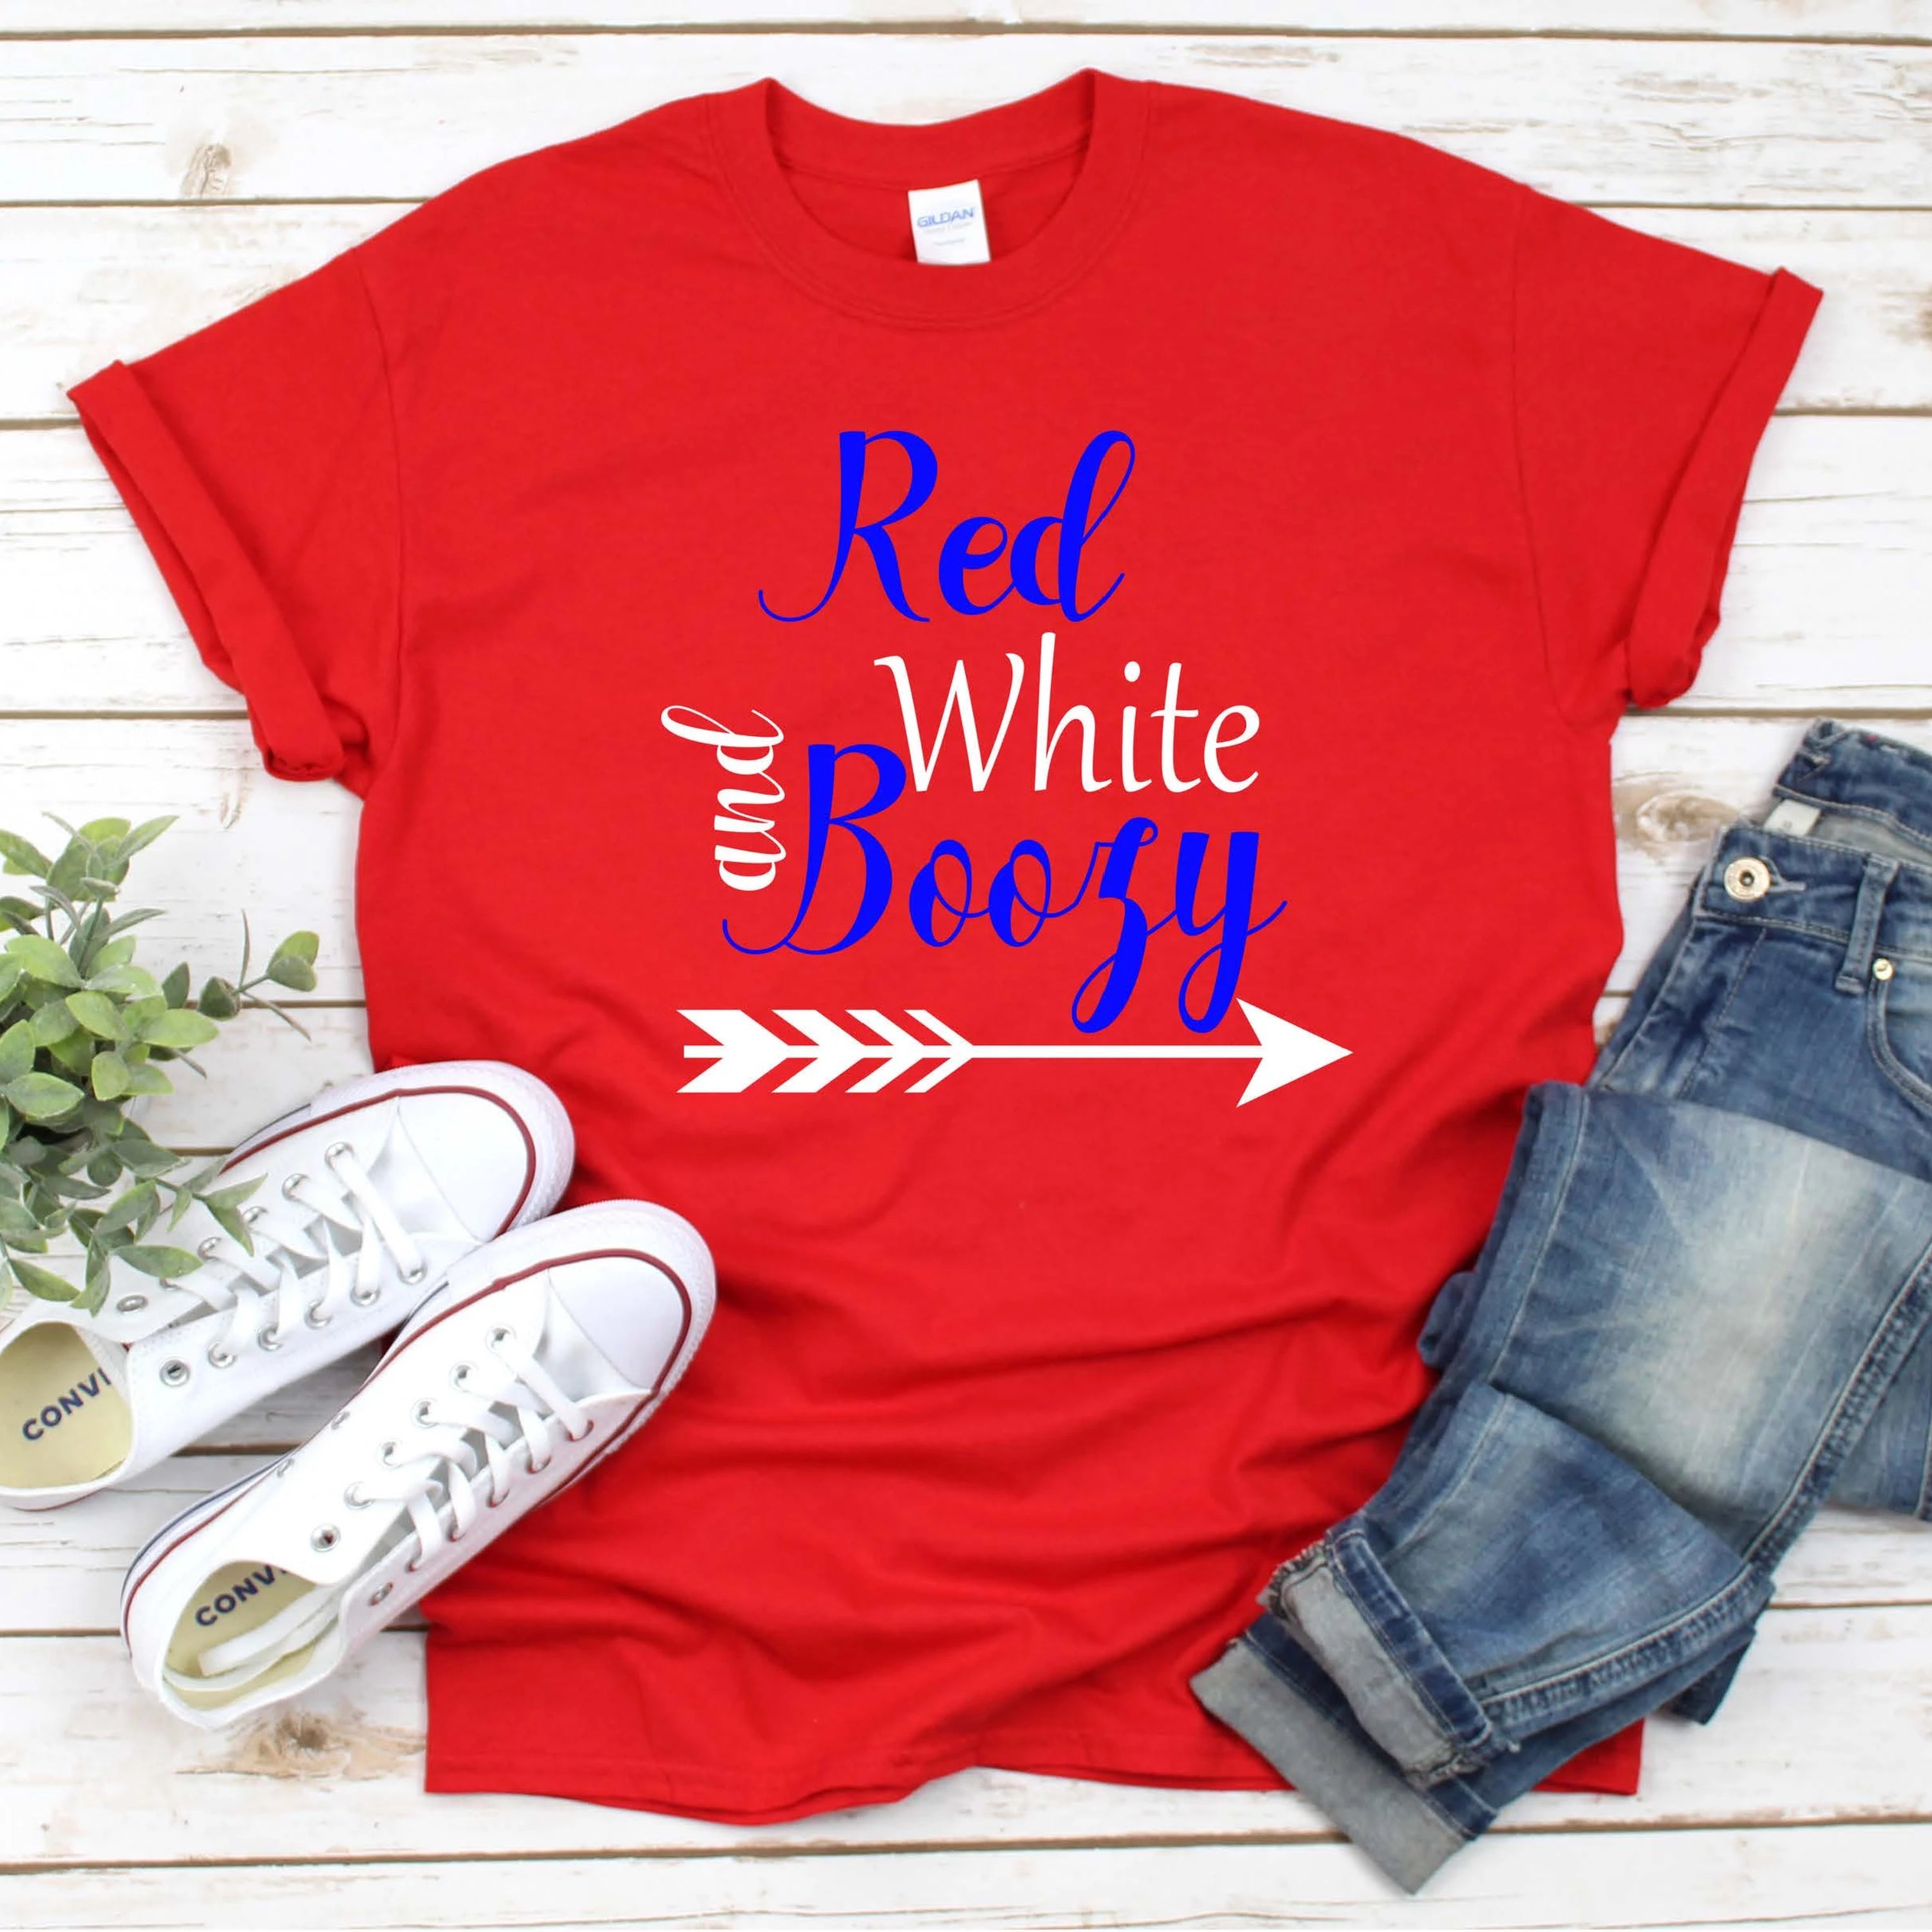 Red, White, & Boozy Tee - Southern Ivy Boutique